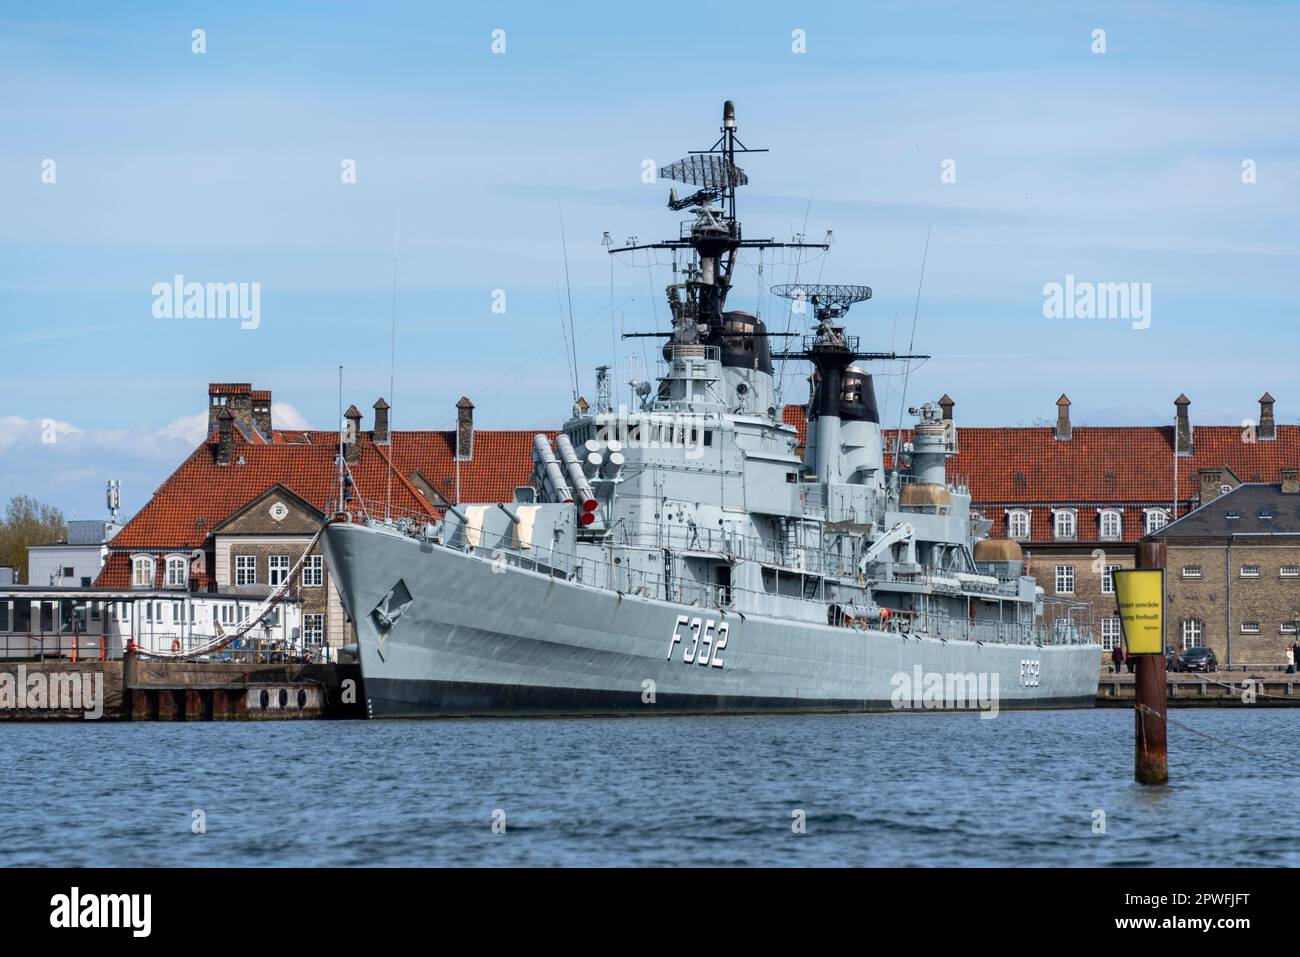 The Peder Skram (F352), a former frigate of the Danish Navy, is anchored at Nyholm in the Copenhagen Naval Station as a museum ship. The ship became f Stock Photo